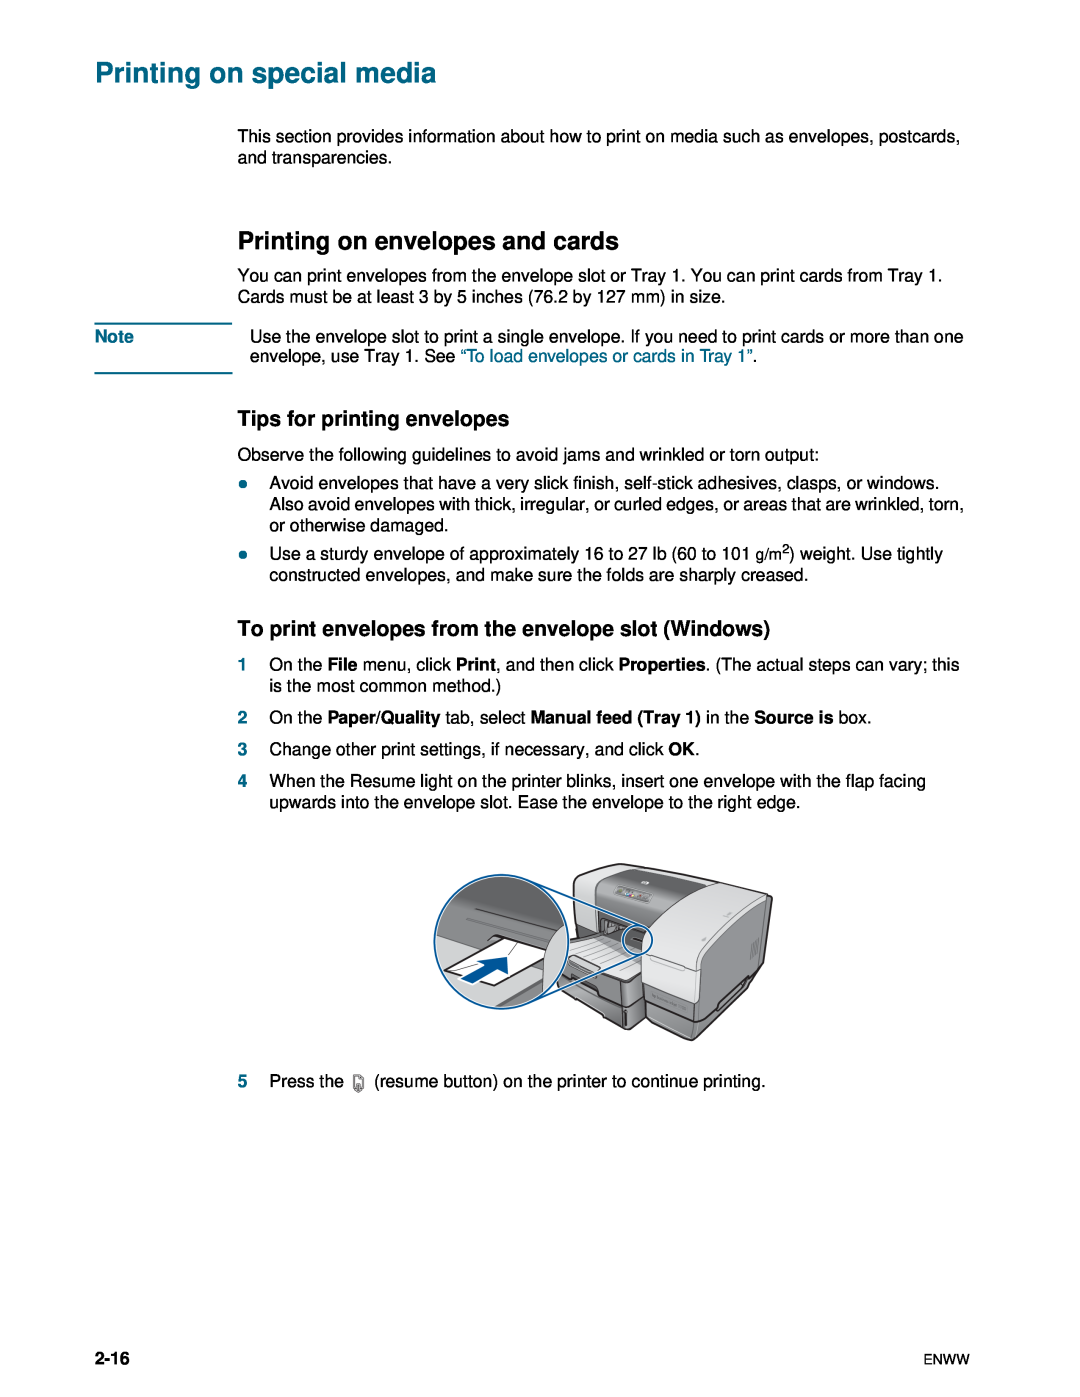 HP 1100dtn manual Printing on special media, Printing on envelopes and cards, Tips for printing envelopes, 2-16 